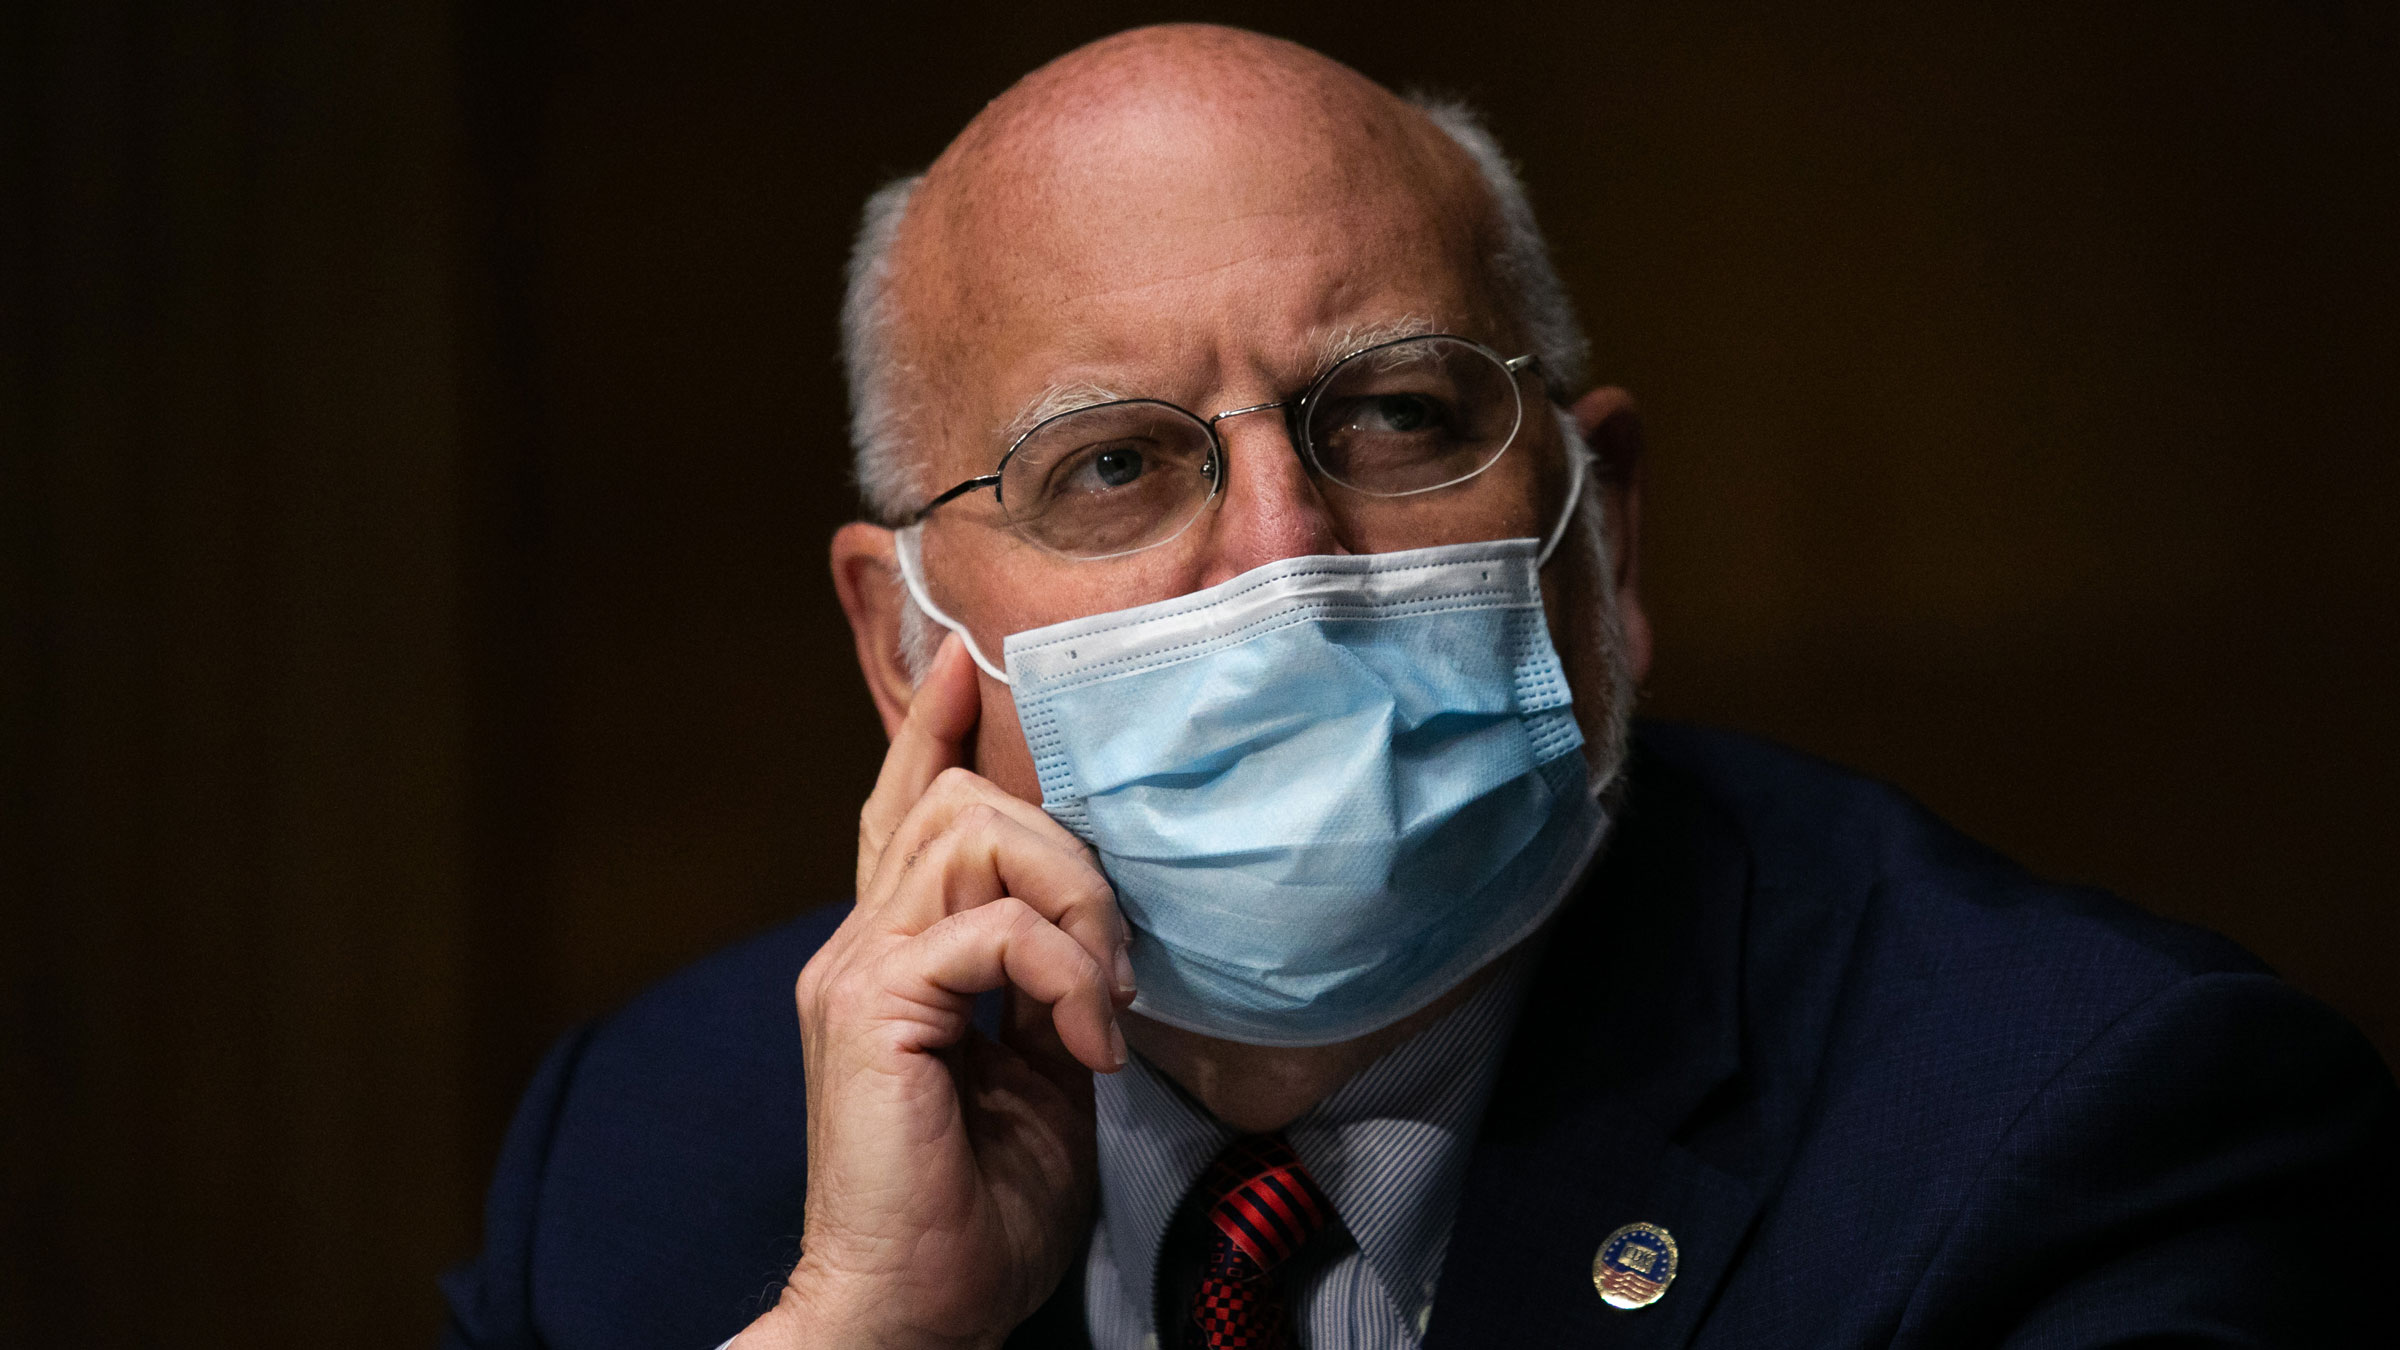 Dr. Robert Redfield, director of the Centers for Disease Control and Prevention, testifies at a Senate subcommittee hearing earlier this month.